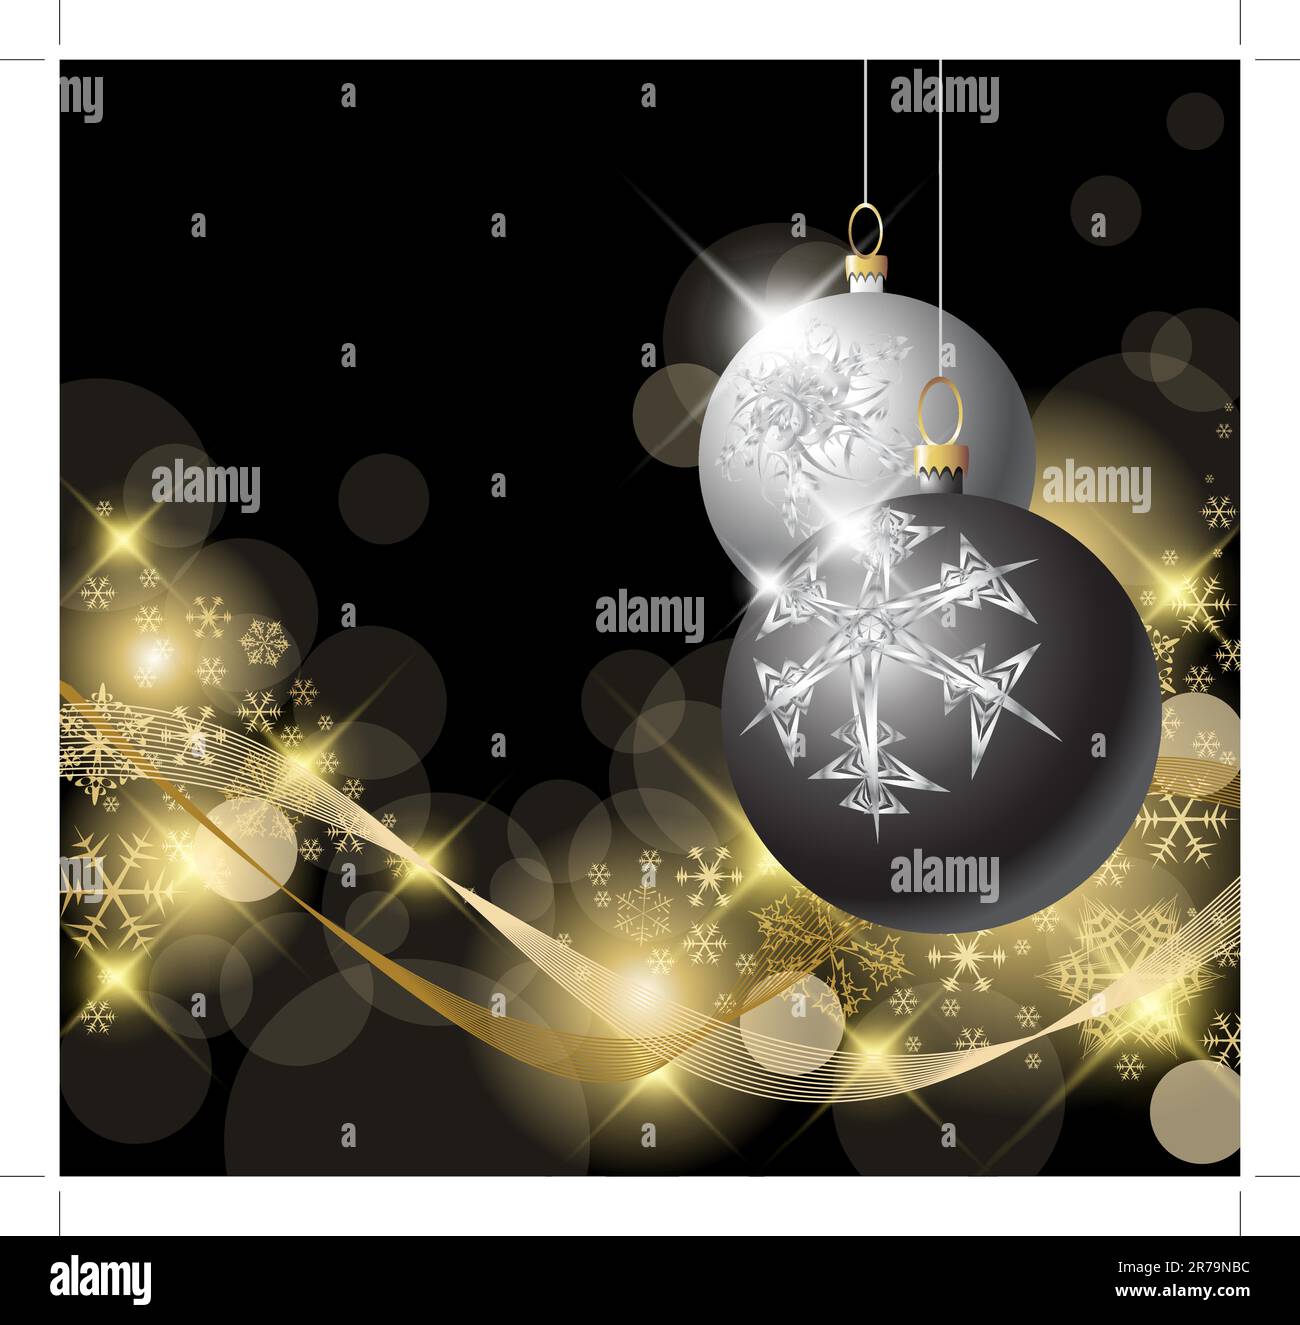 Black and Silver Christmas bulbs with golden snowflakes Stock Vector